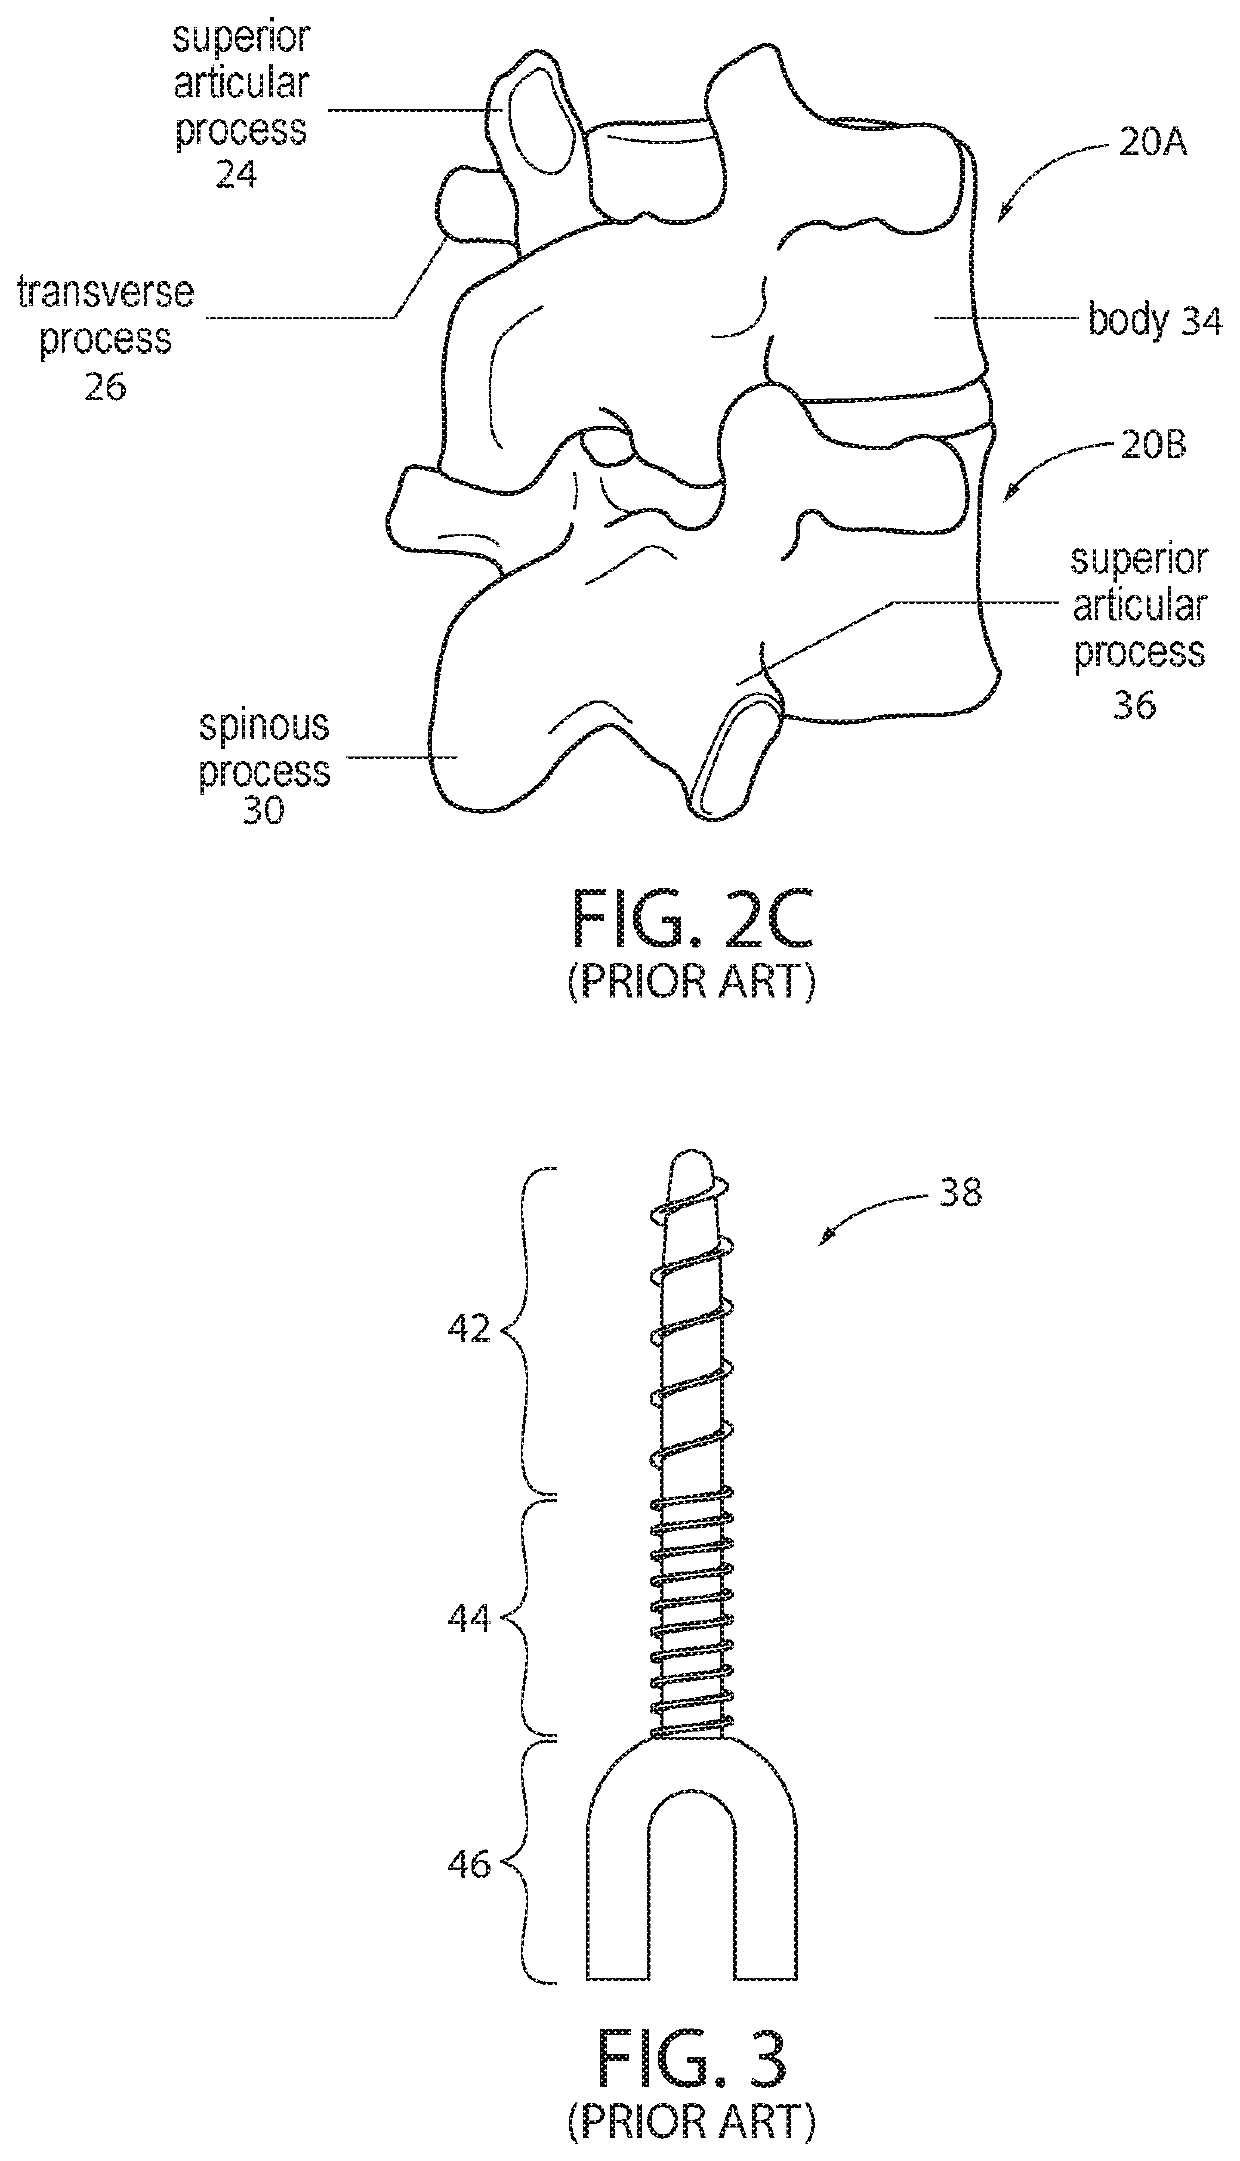 Pedicle screw placement system and method for spinal surgery